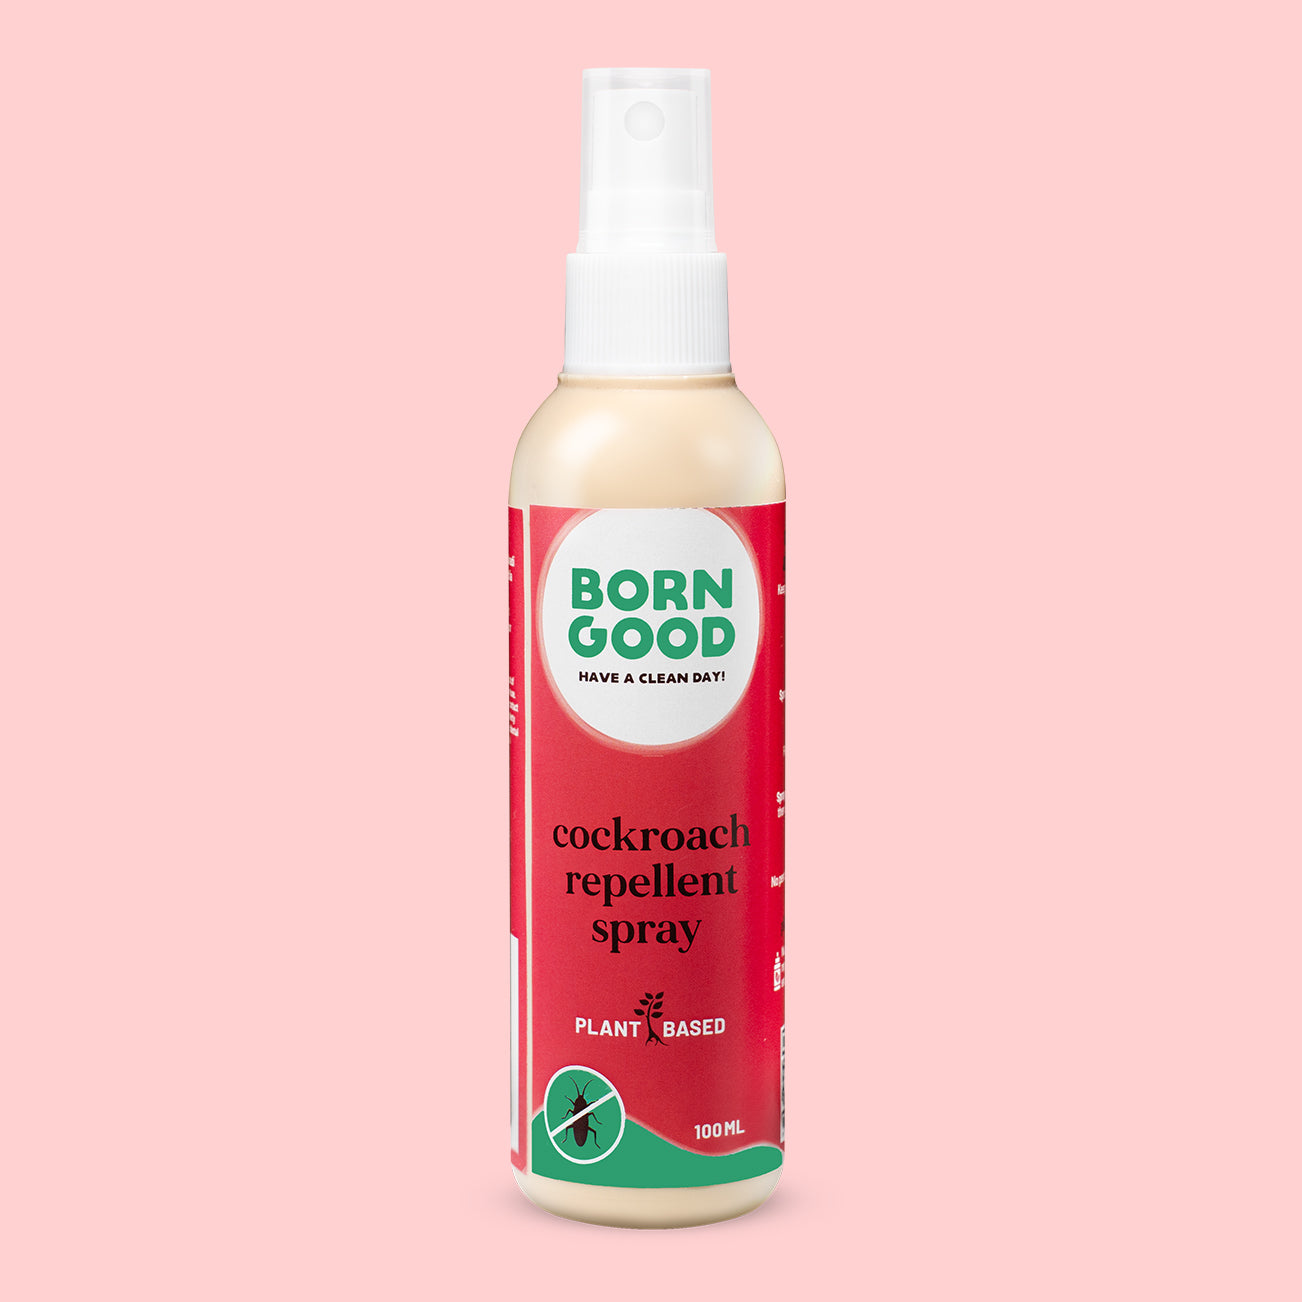 Plant-based Cockroach Repellent Spray